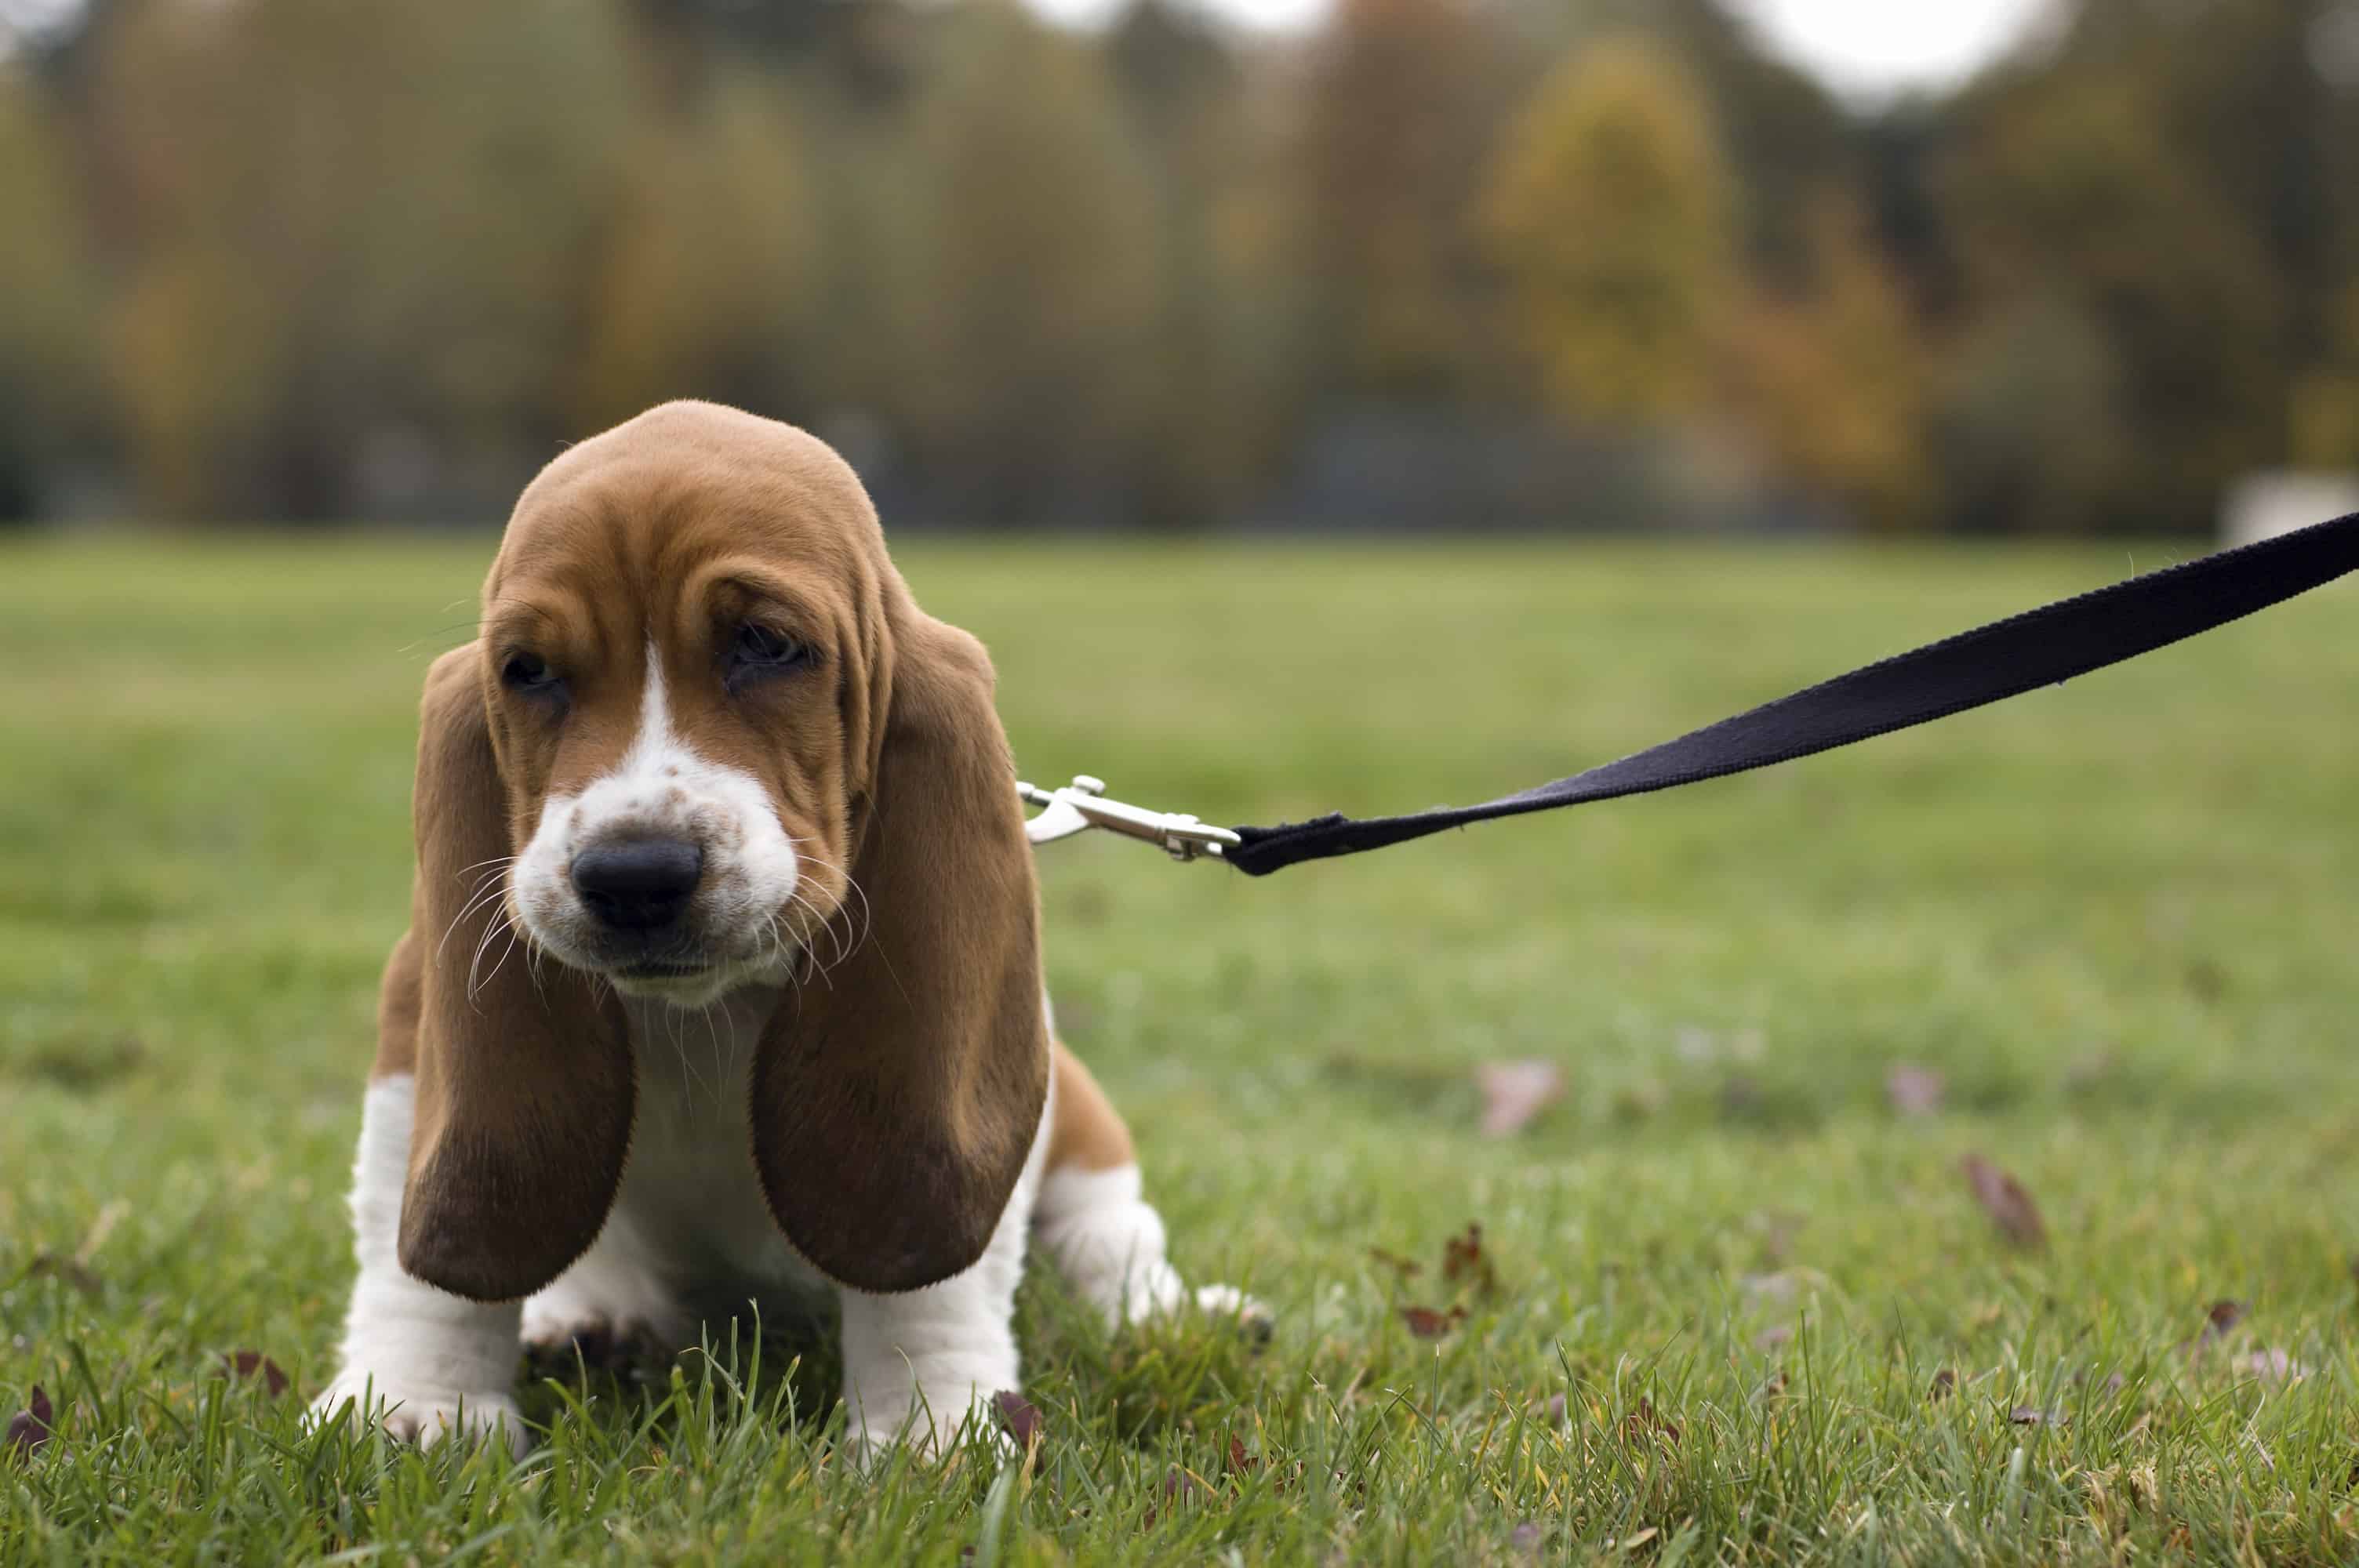 Socialize your puppy to a leash early on